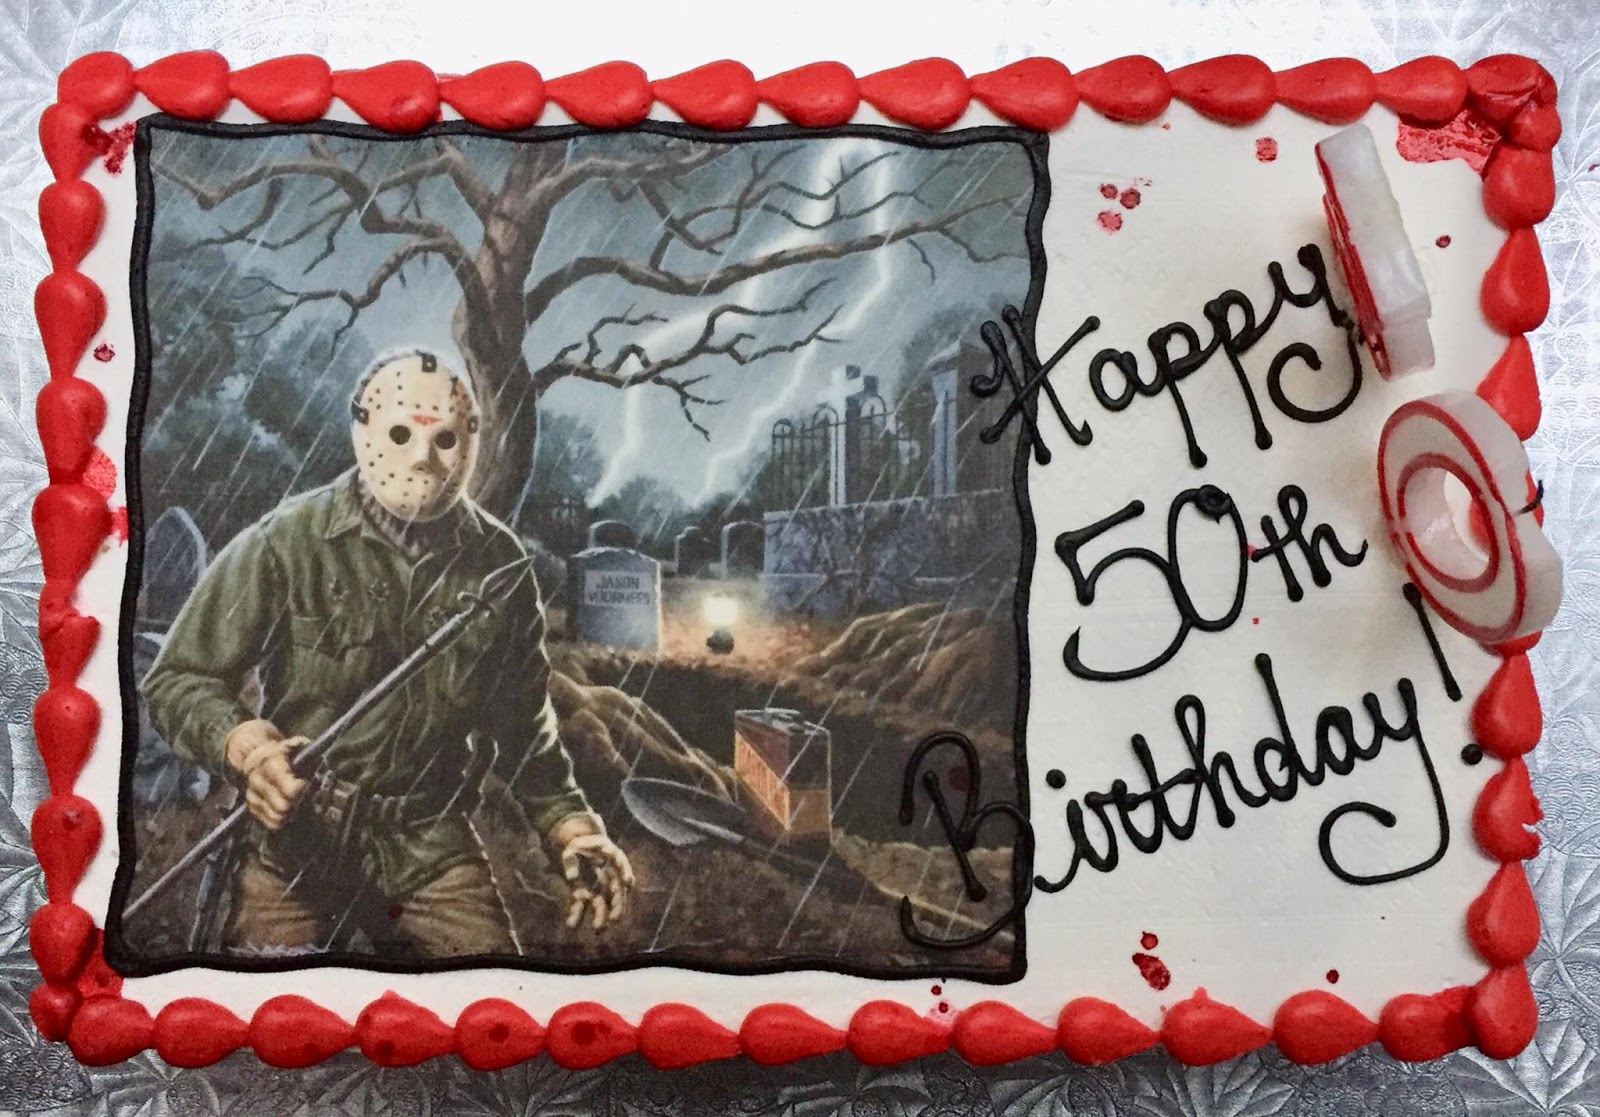 Have A Killer Birthday Cake Topper Jason Friday the 13th Birthday Party  Decorations Cake Topper Halloween Birthday Cake Topper Horror Movie Party  Decorations Halloween Zombie Vampire Party Decora - Walmart.com